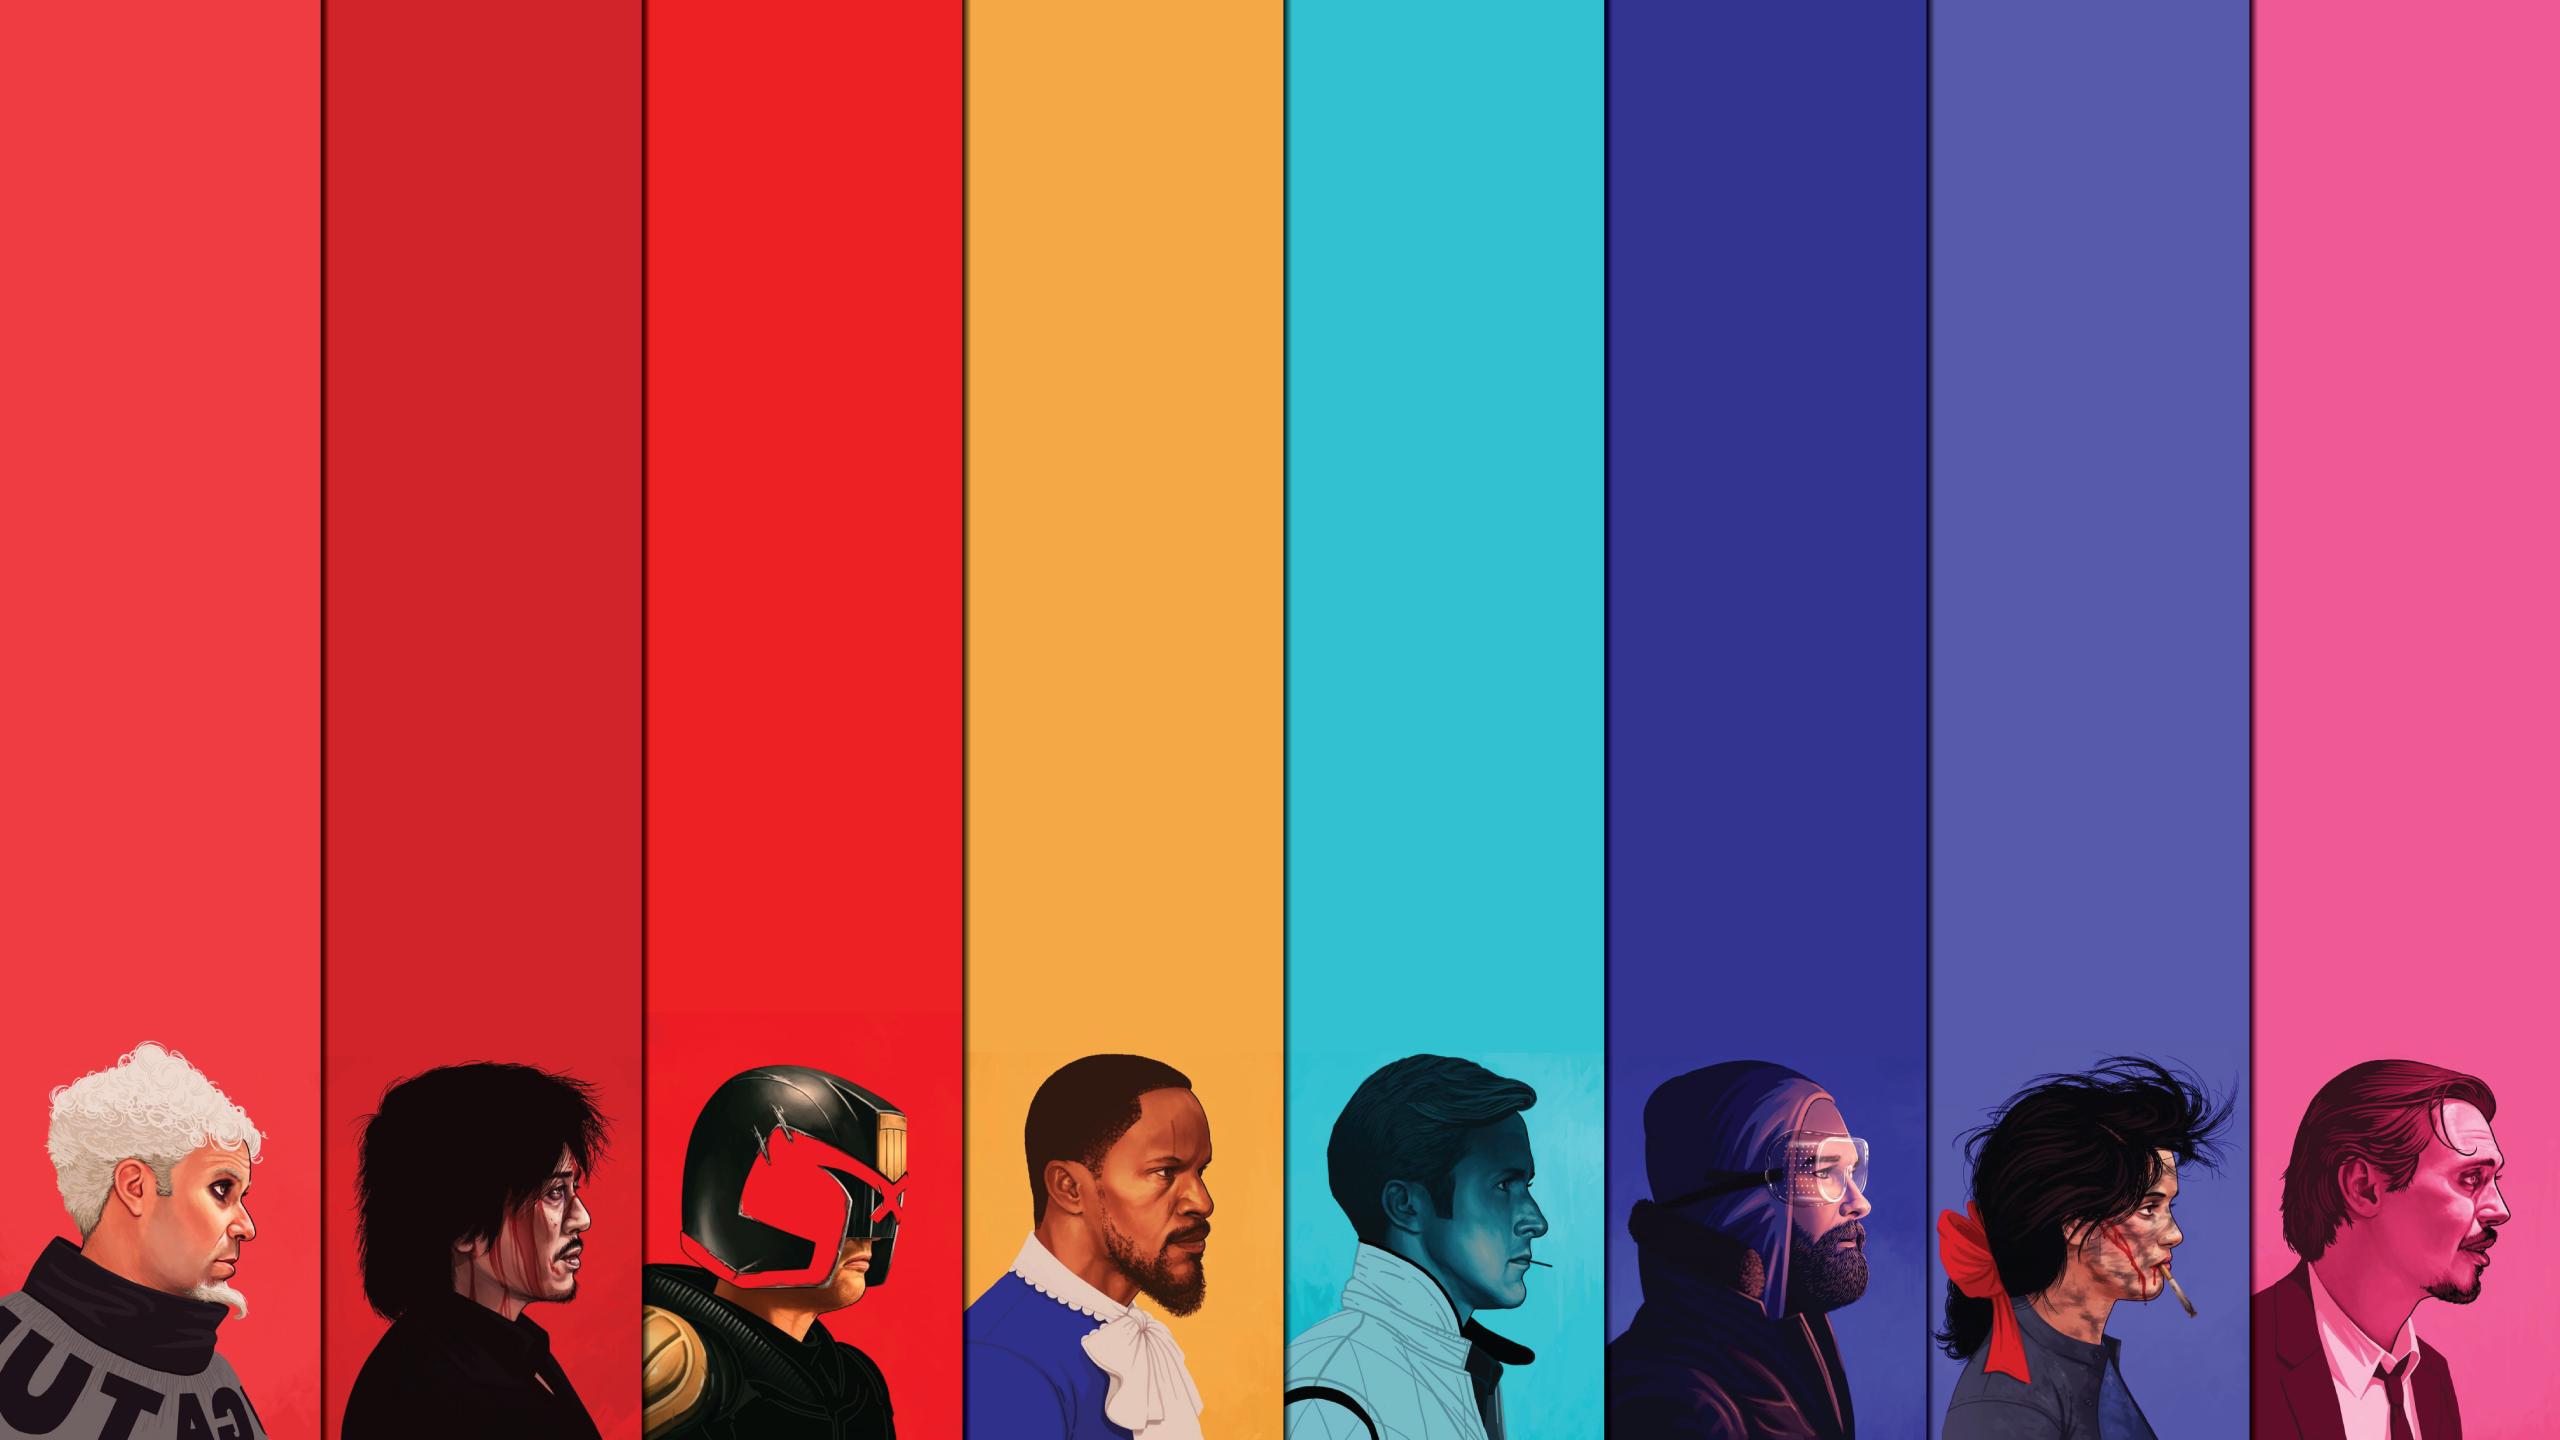 Wallpaper based on Mike Mitchell's Movie Portraits 2560x1440